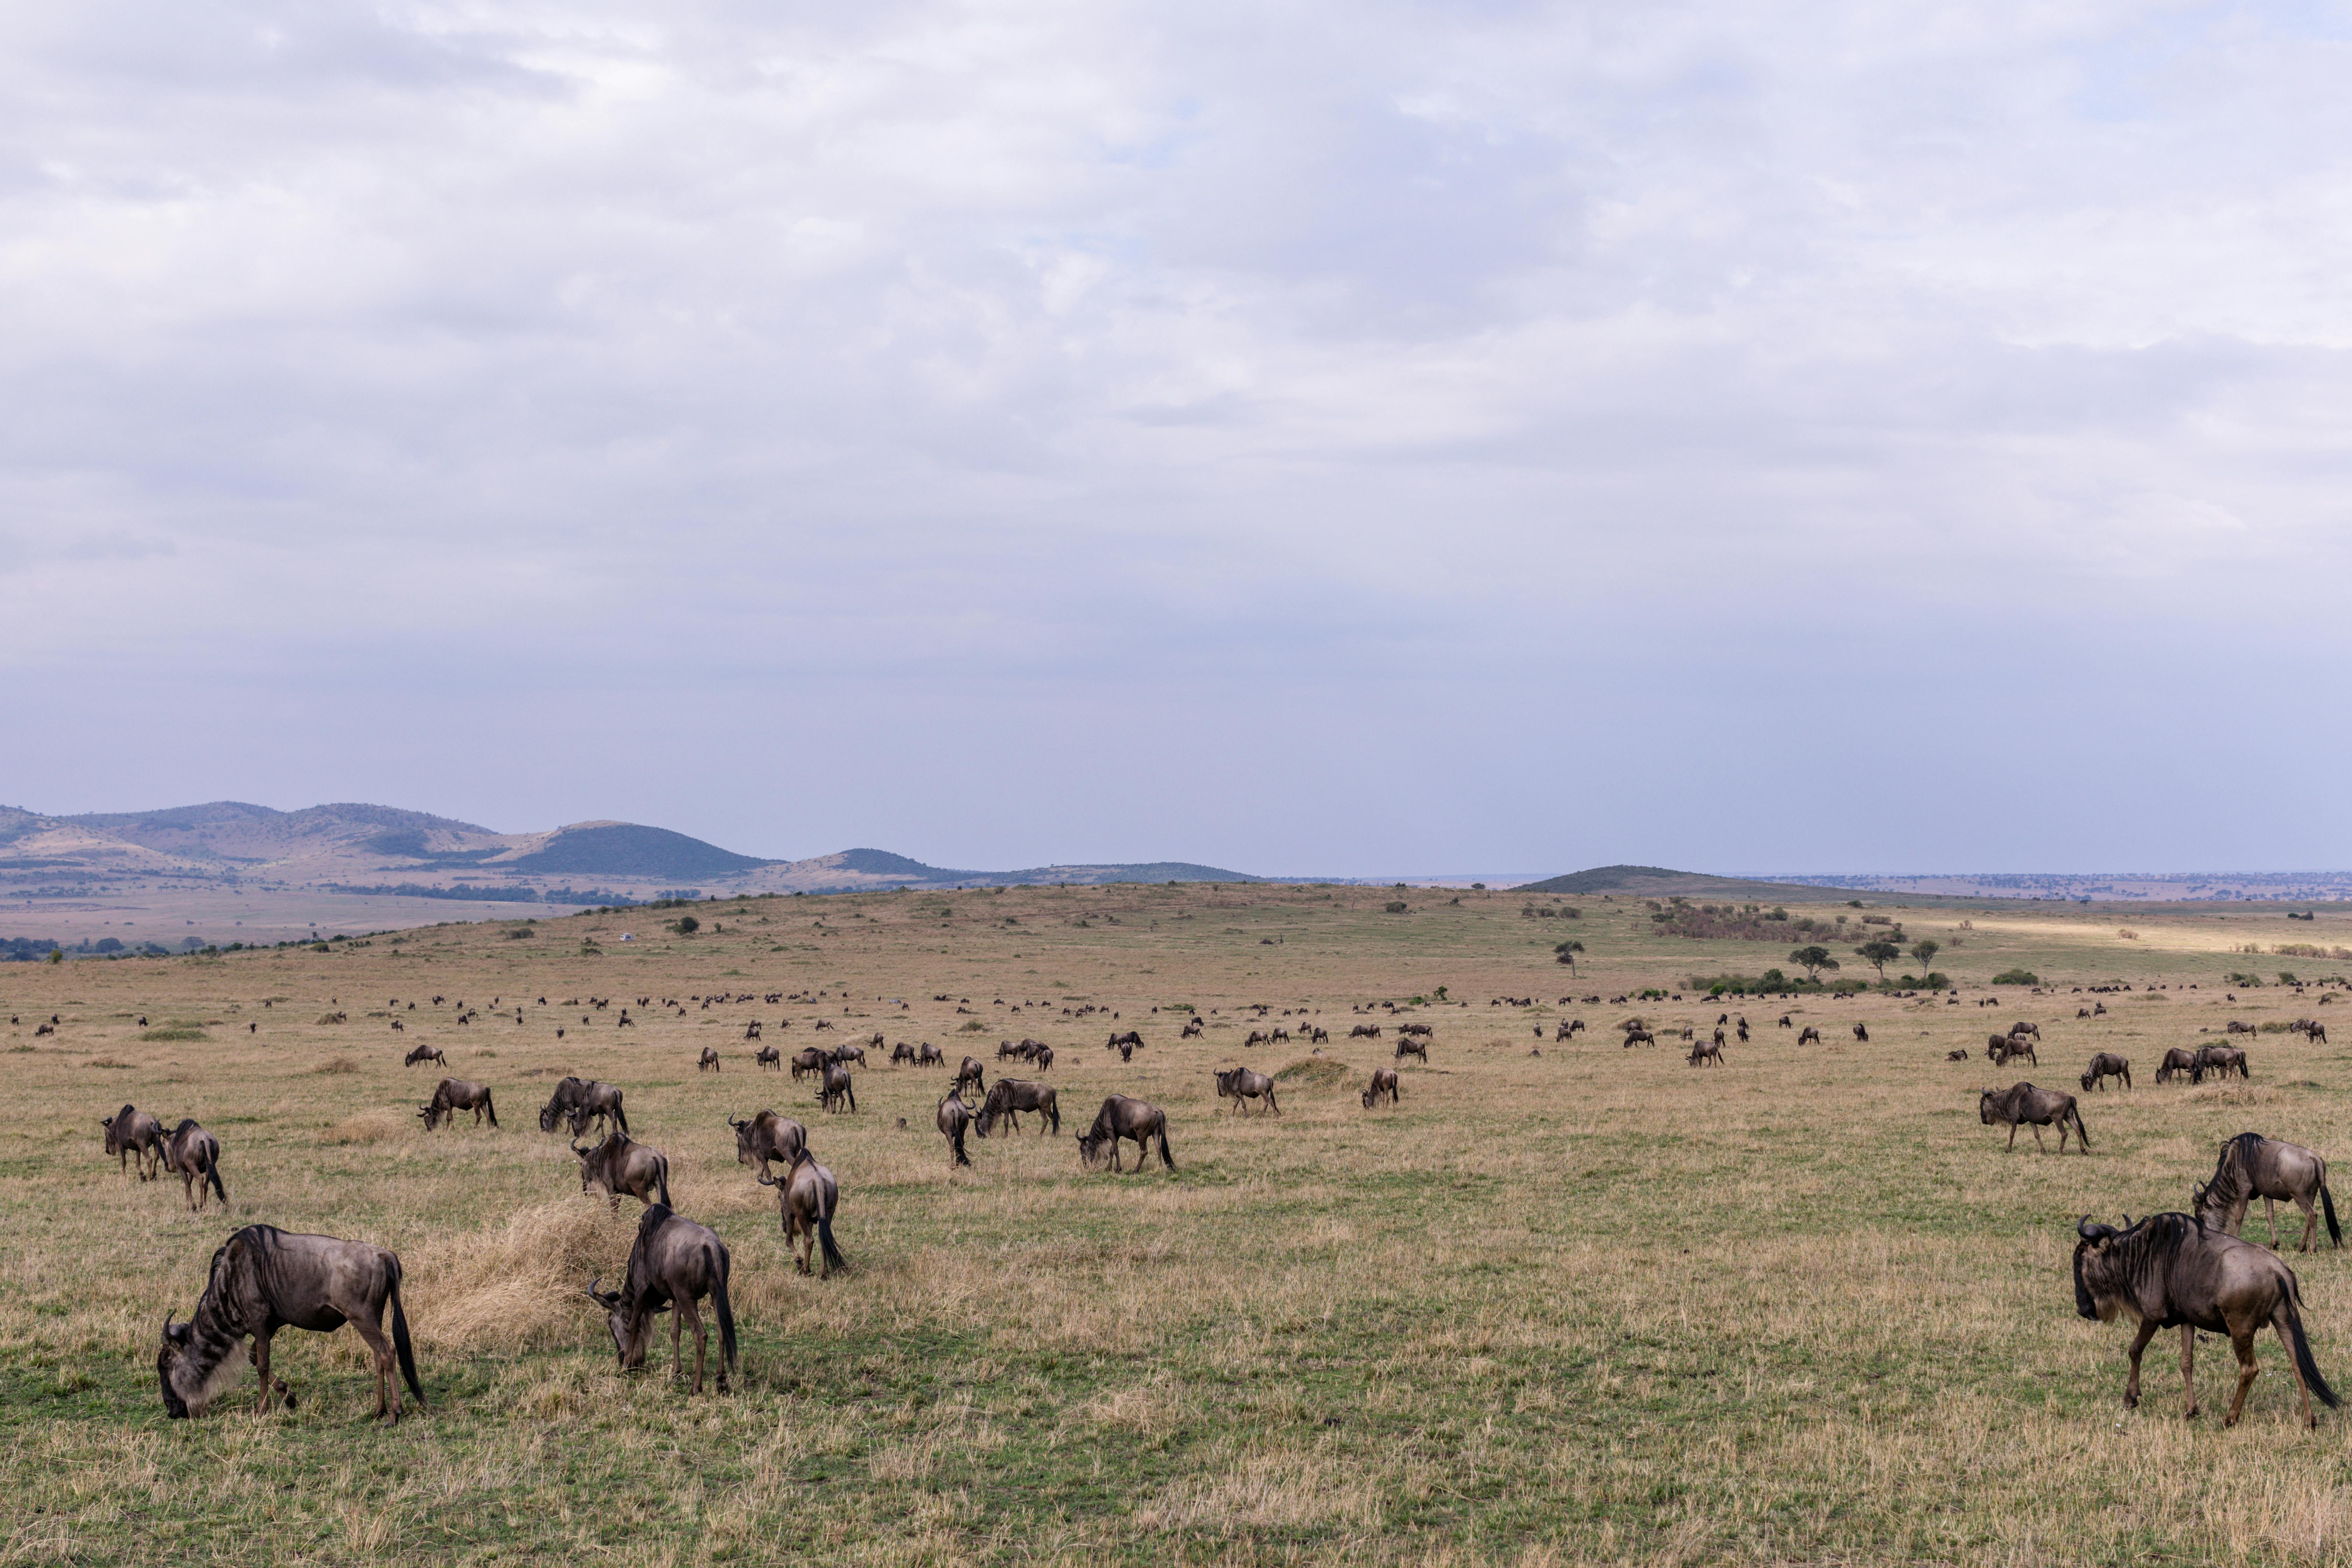 Wildebeests grazing on grassy hilly terrain · Free Stock Photo